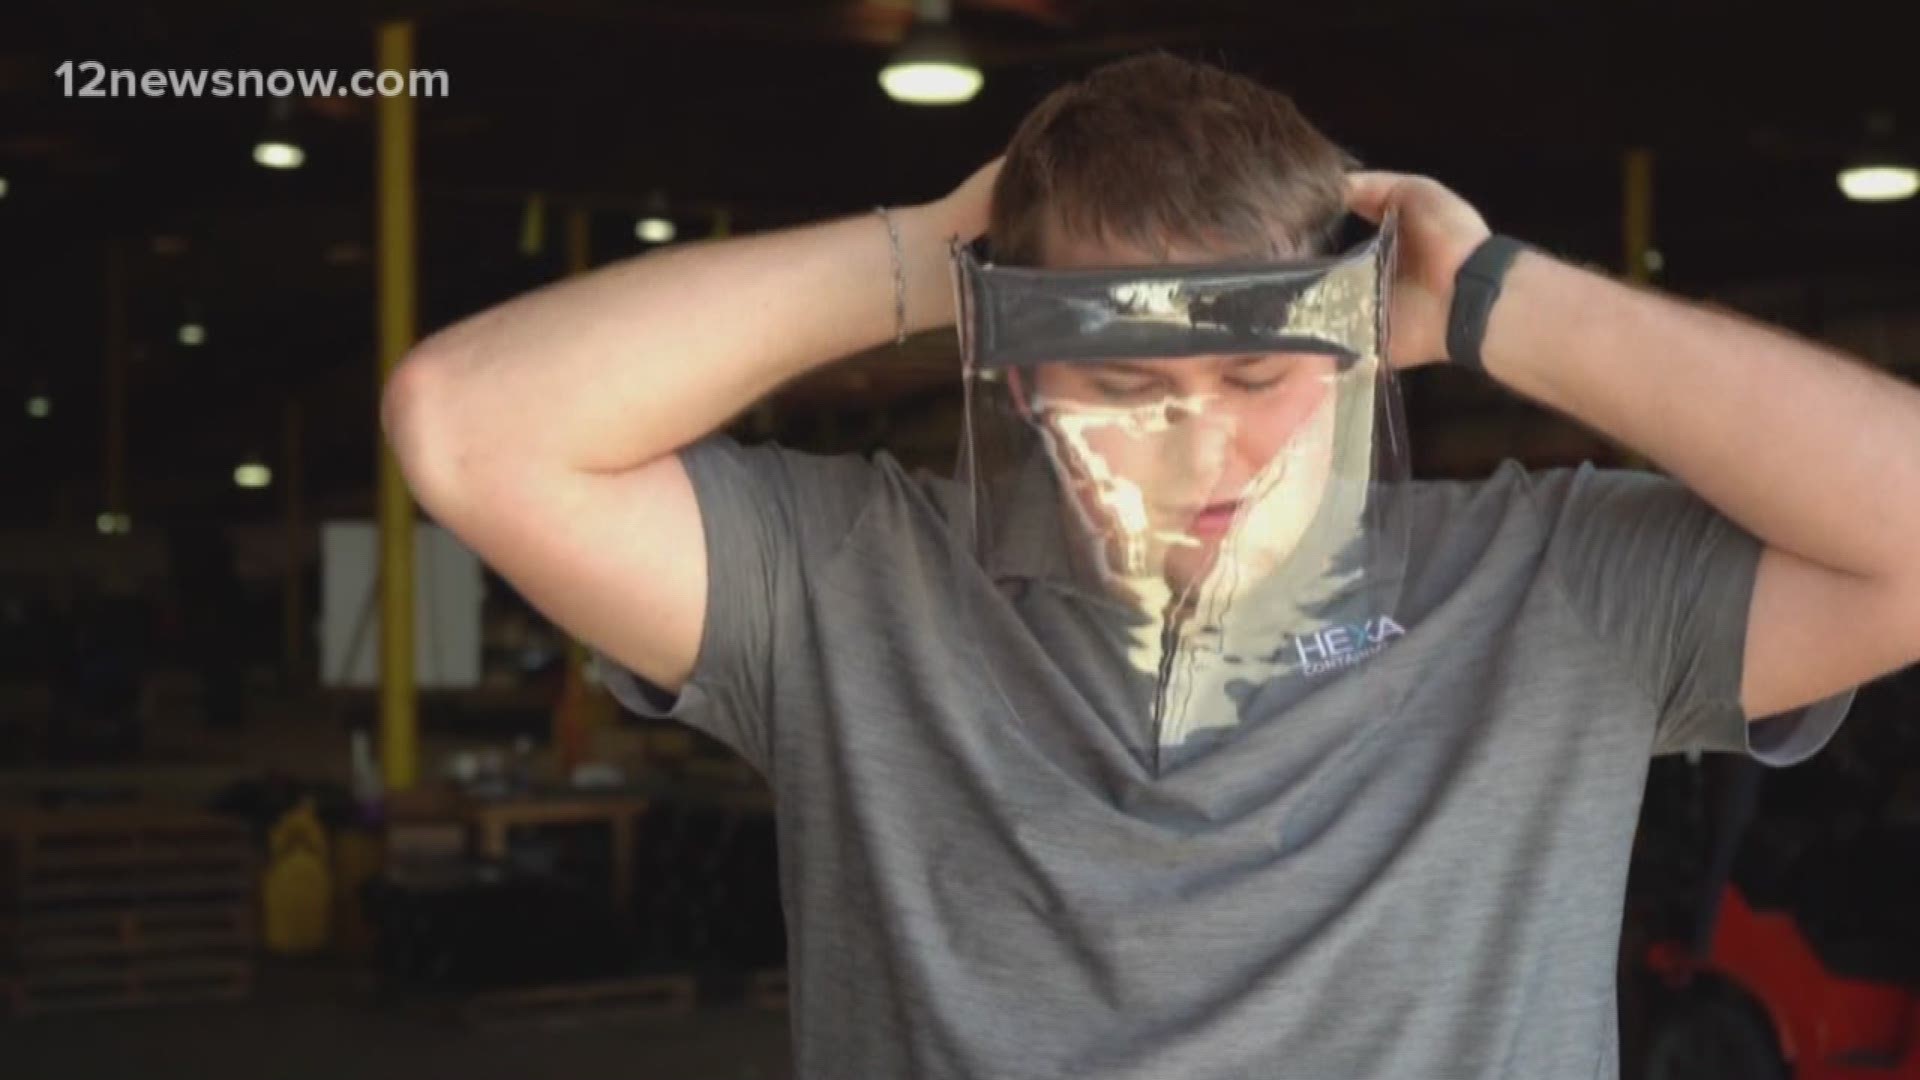 The company has already sold thousands of the face shields